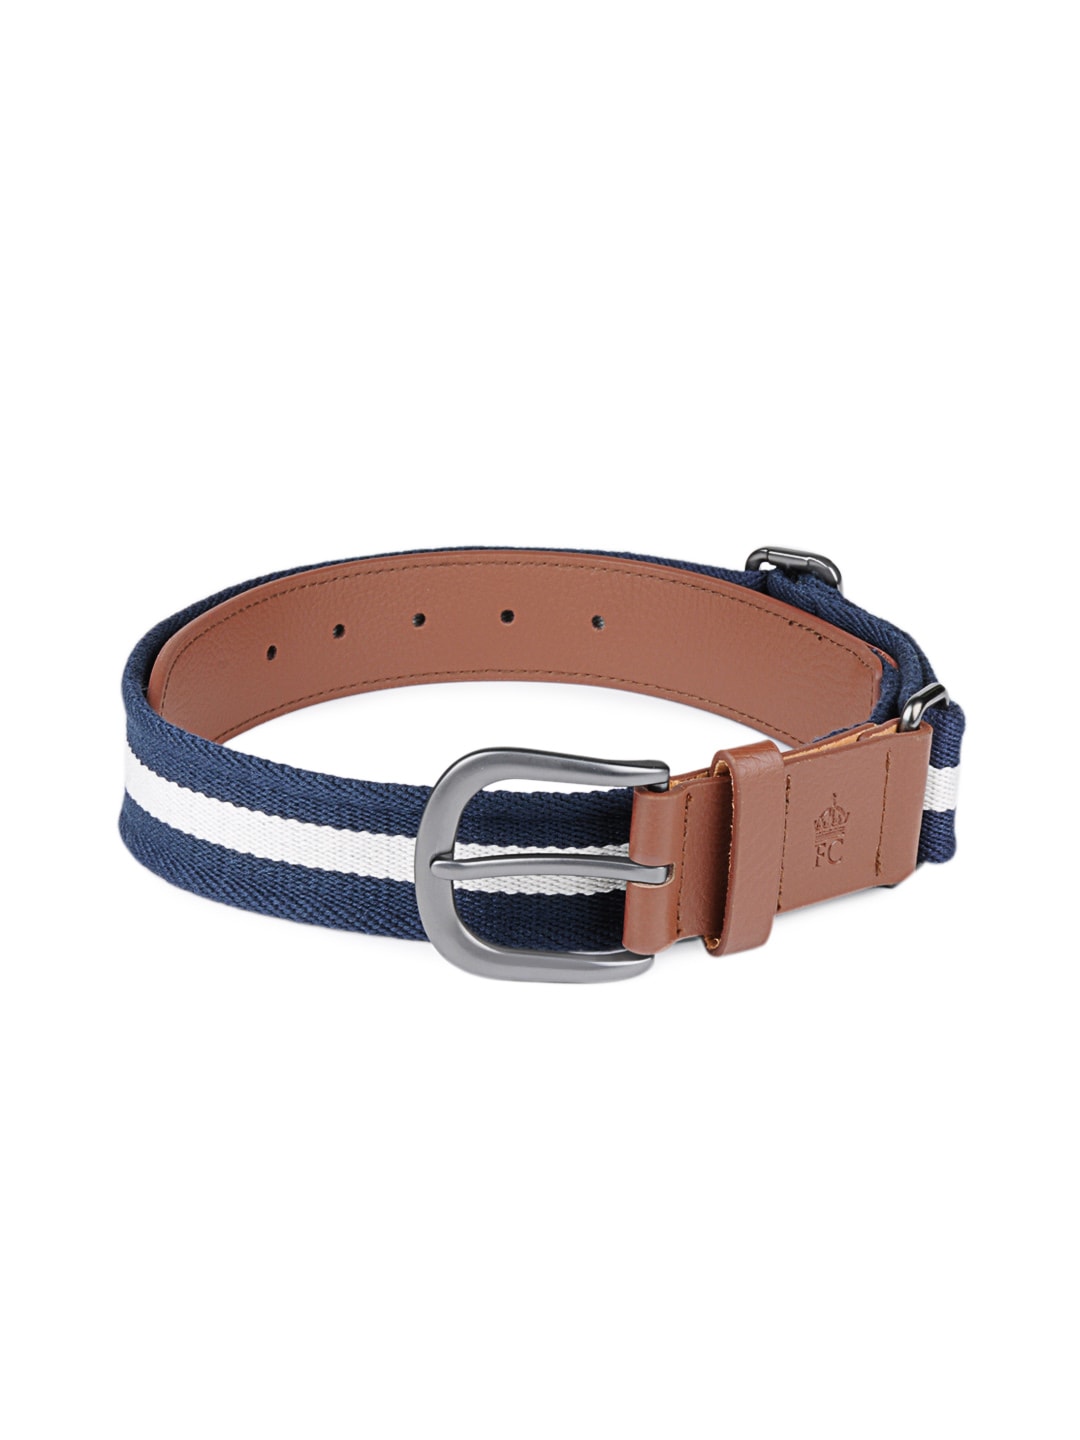 French Connection Men Navy Blue & White Belt